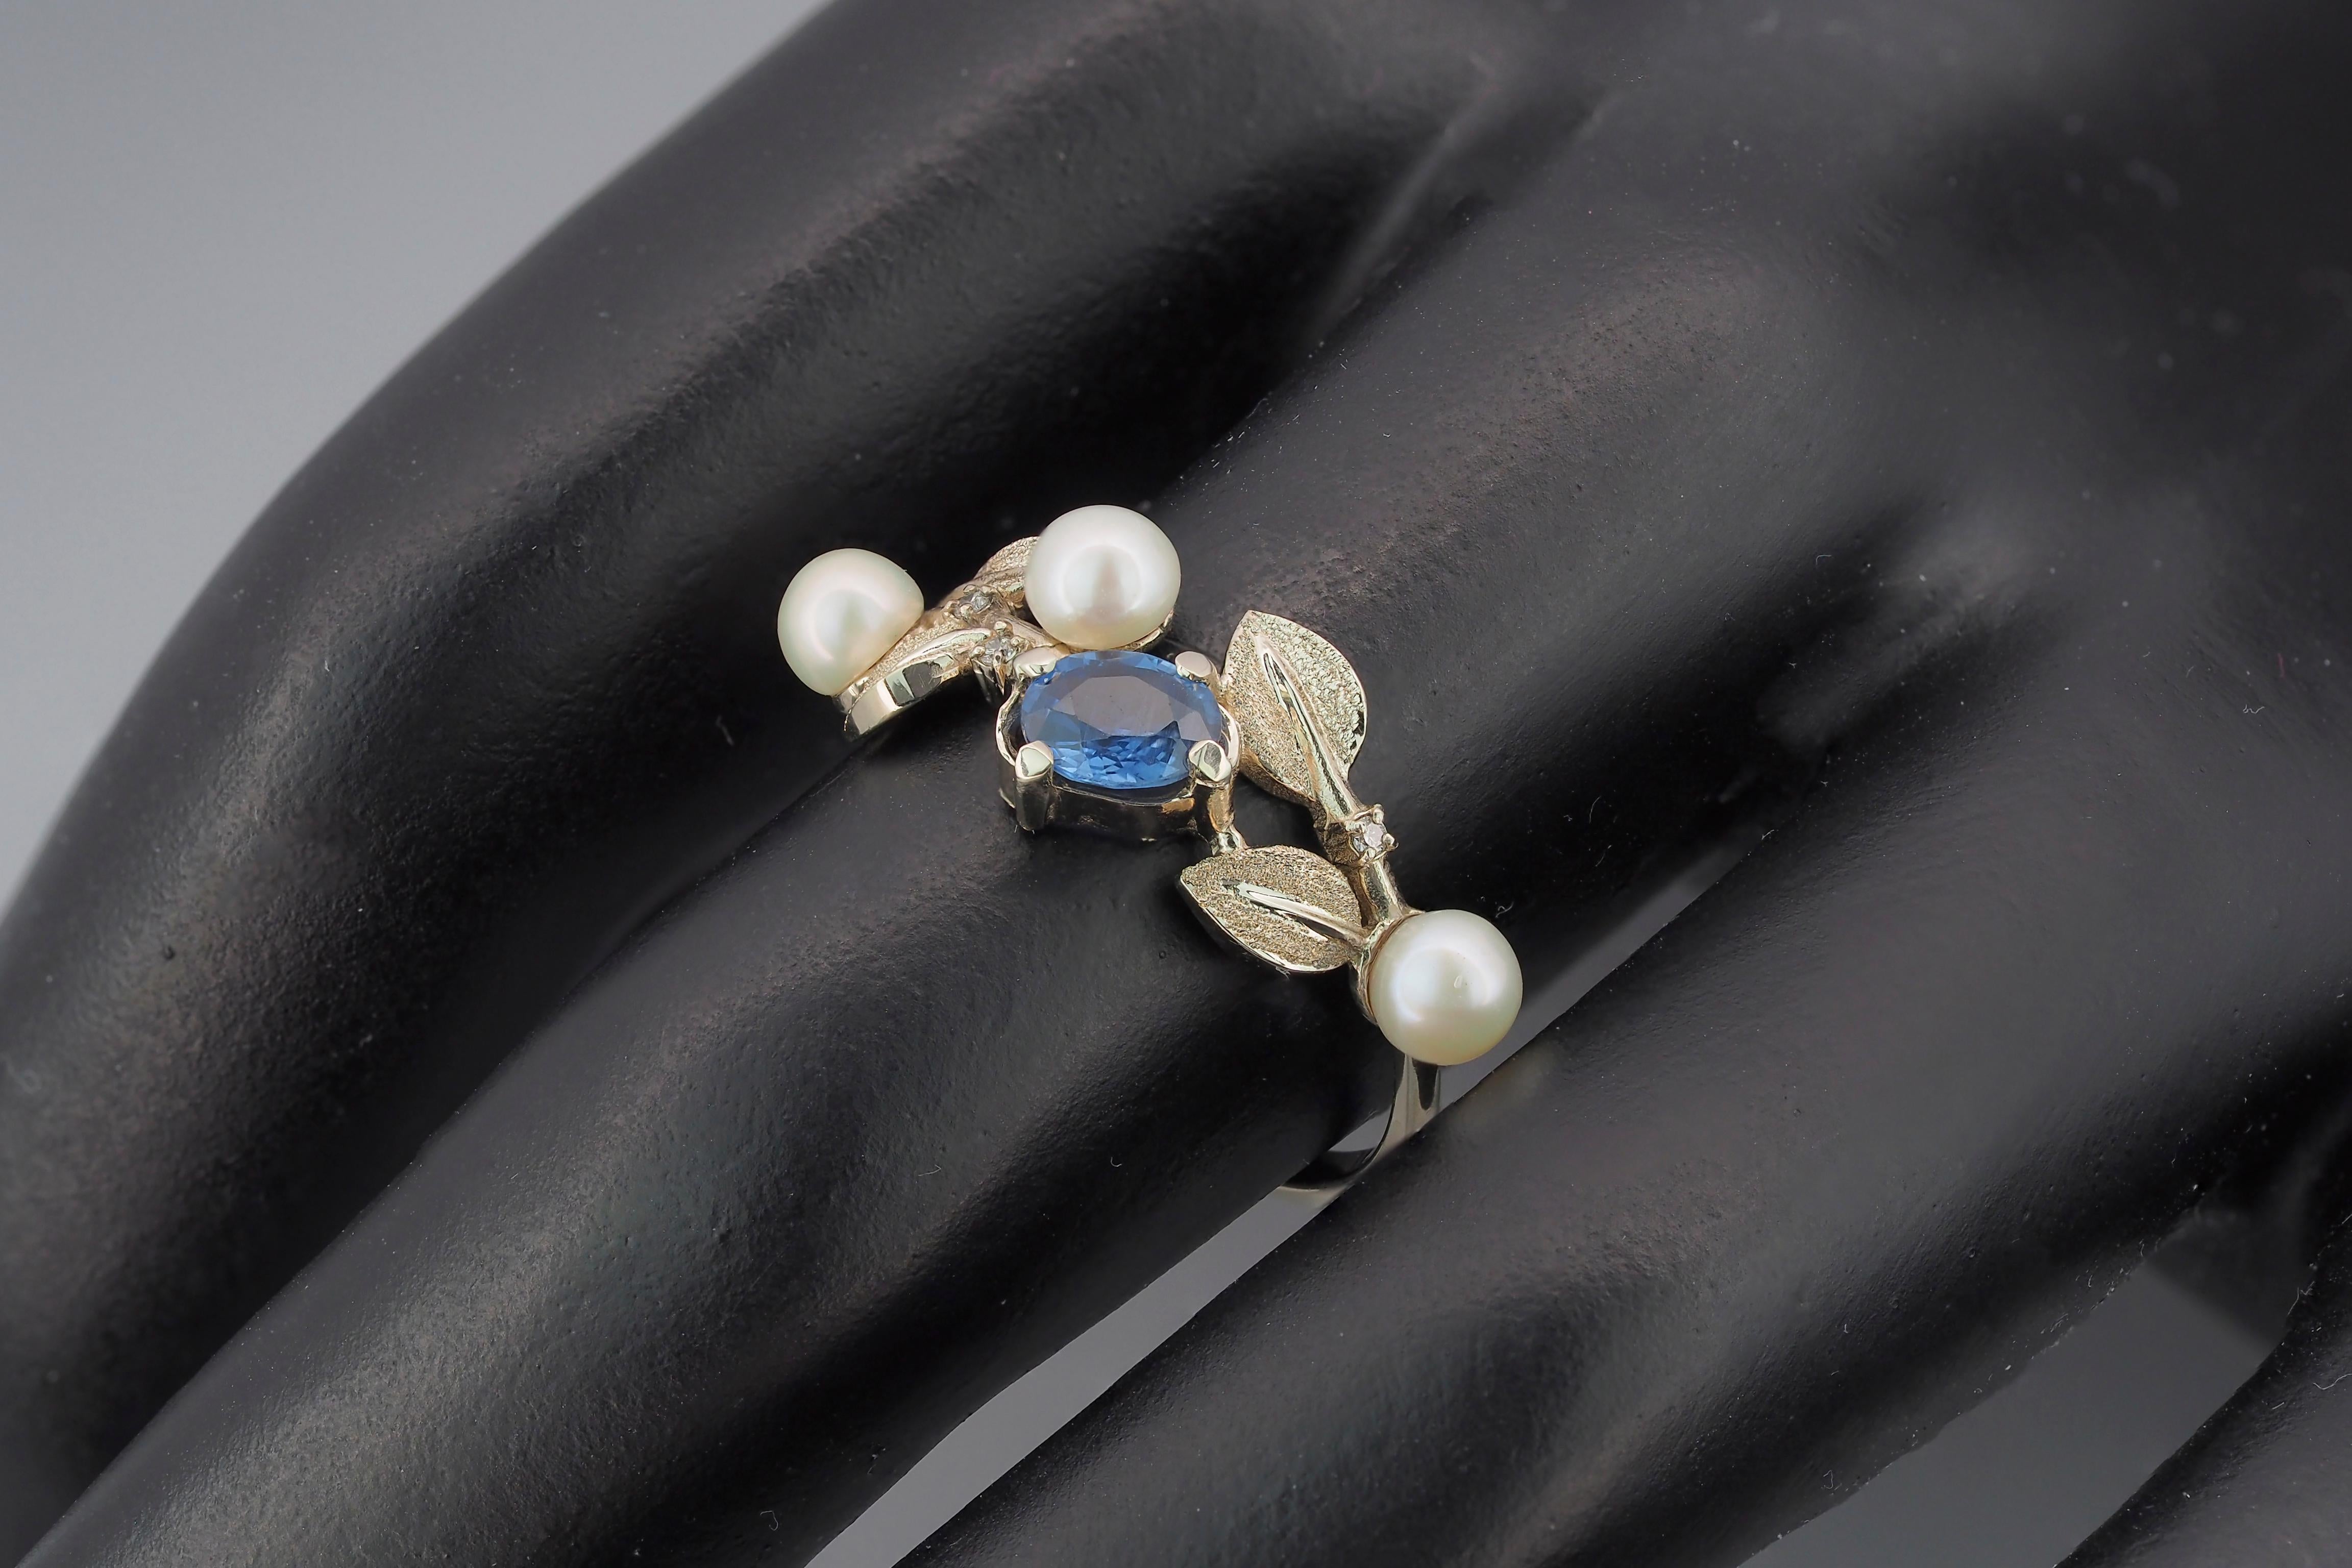 For Sale:  14k Gold Floral Ring with Sapphire, Diamonds and Pearls 7